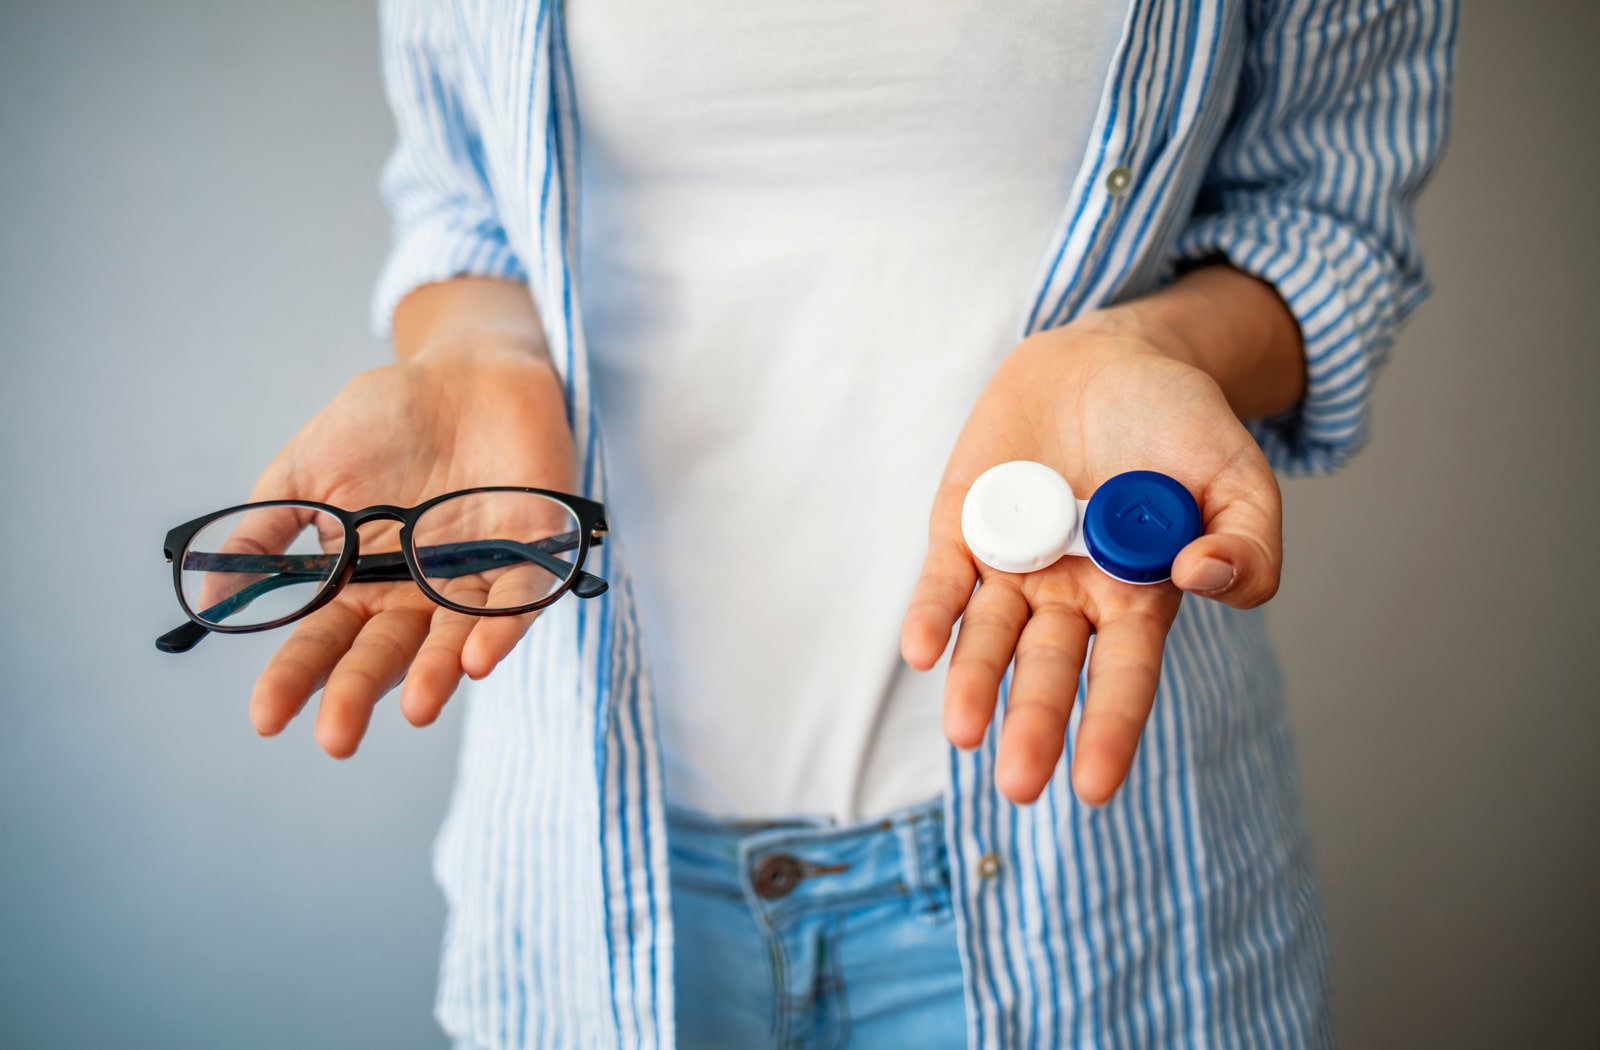 Forstyrre et eller andet sted Rådne What's the Difference Between Eye Exam & Contact Lens Exam?